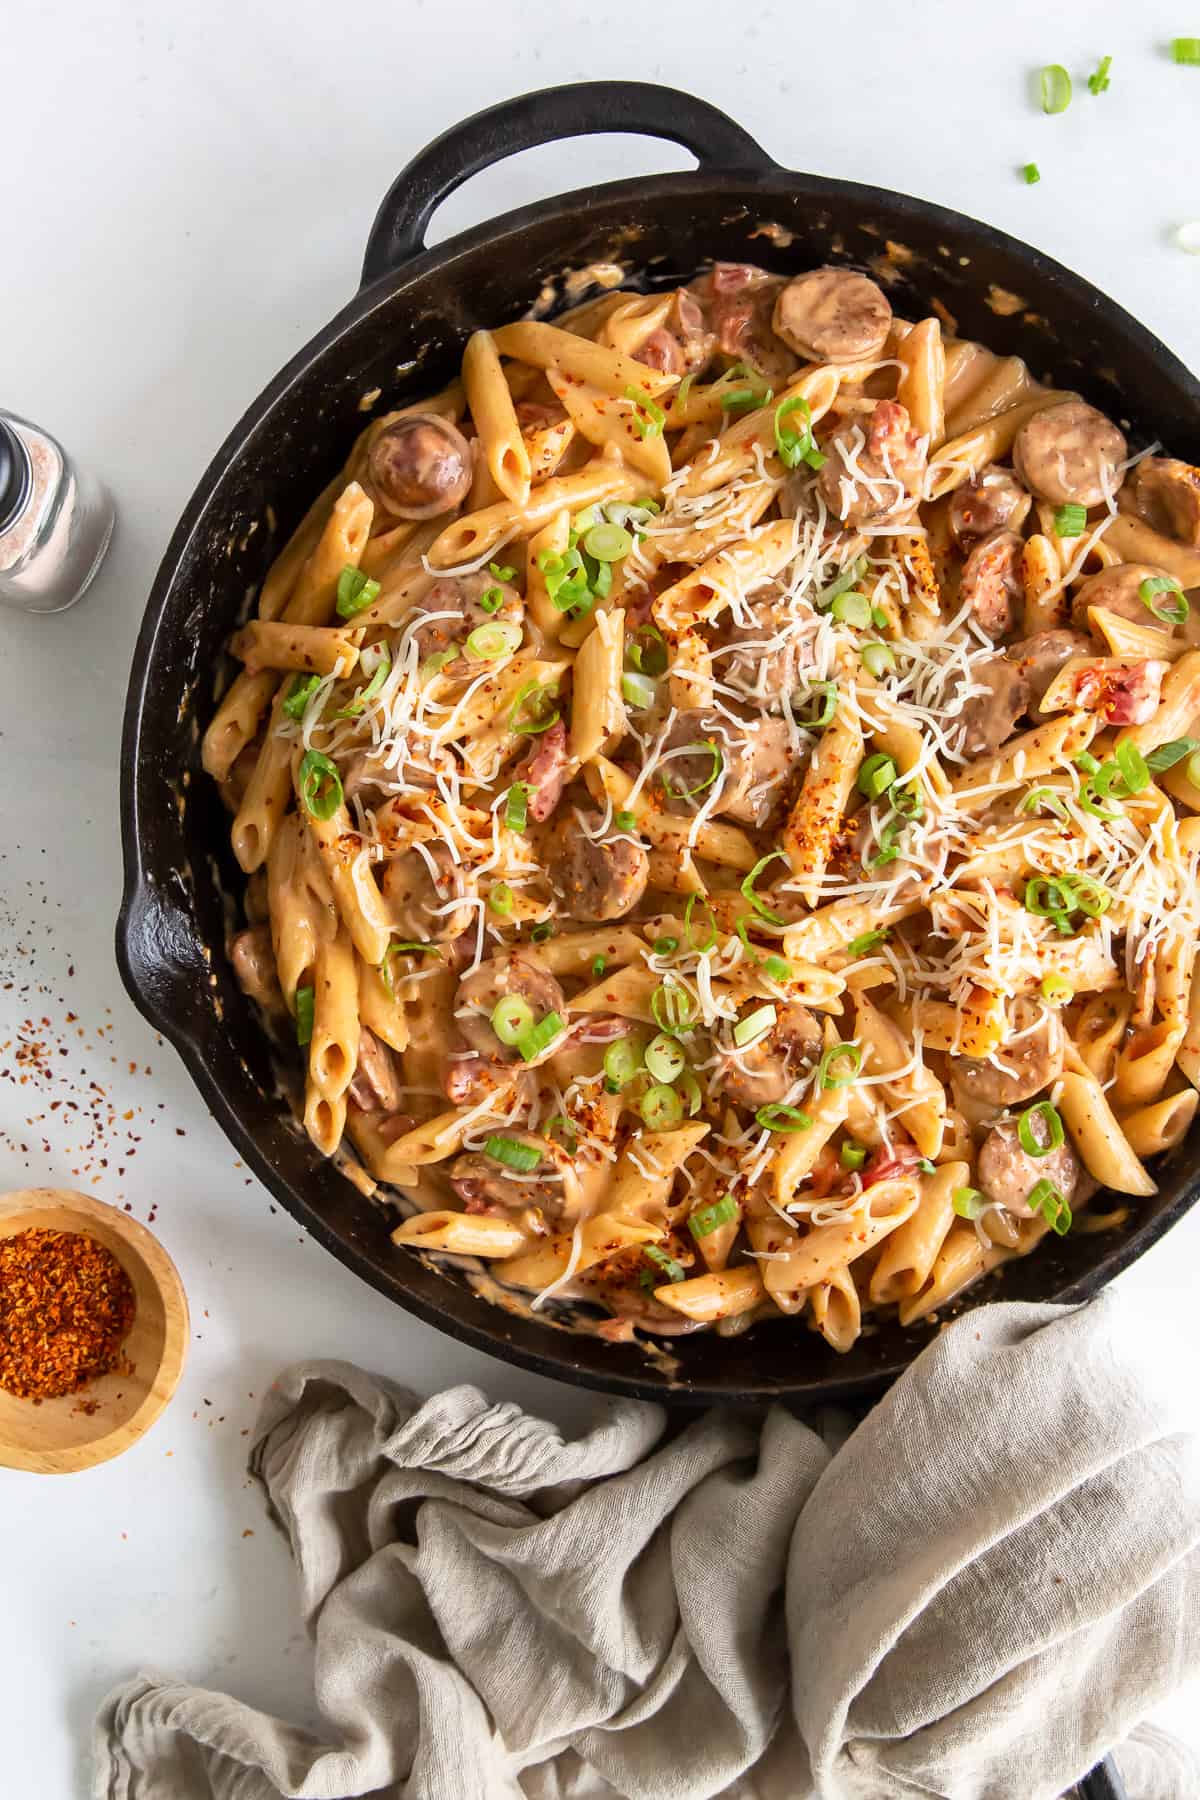 An over the top shot of a cast iron skillet filled with pasta and sausage.